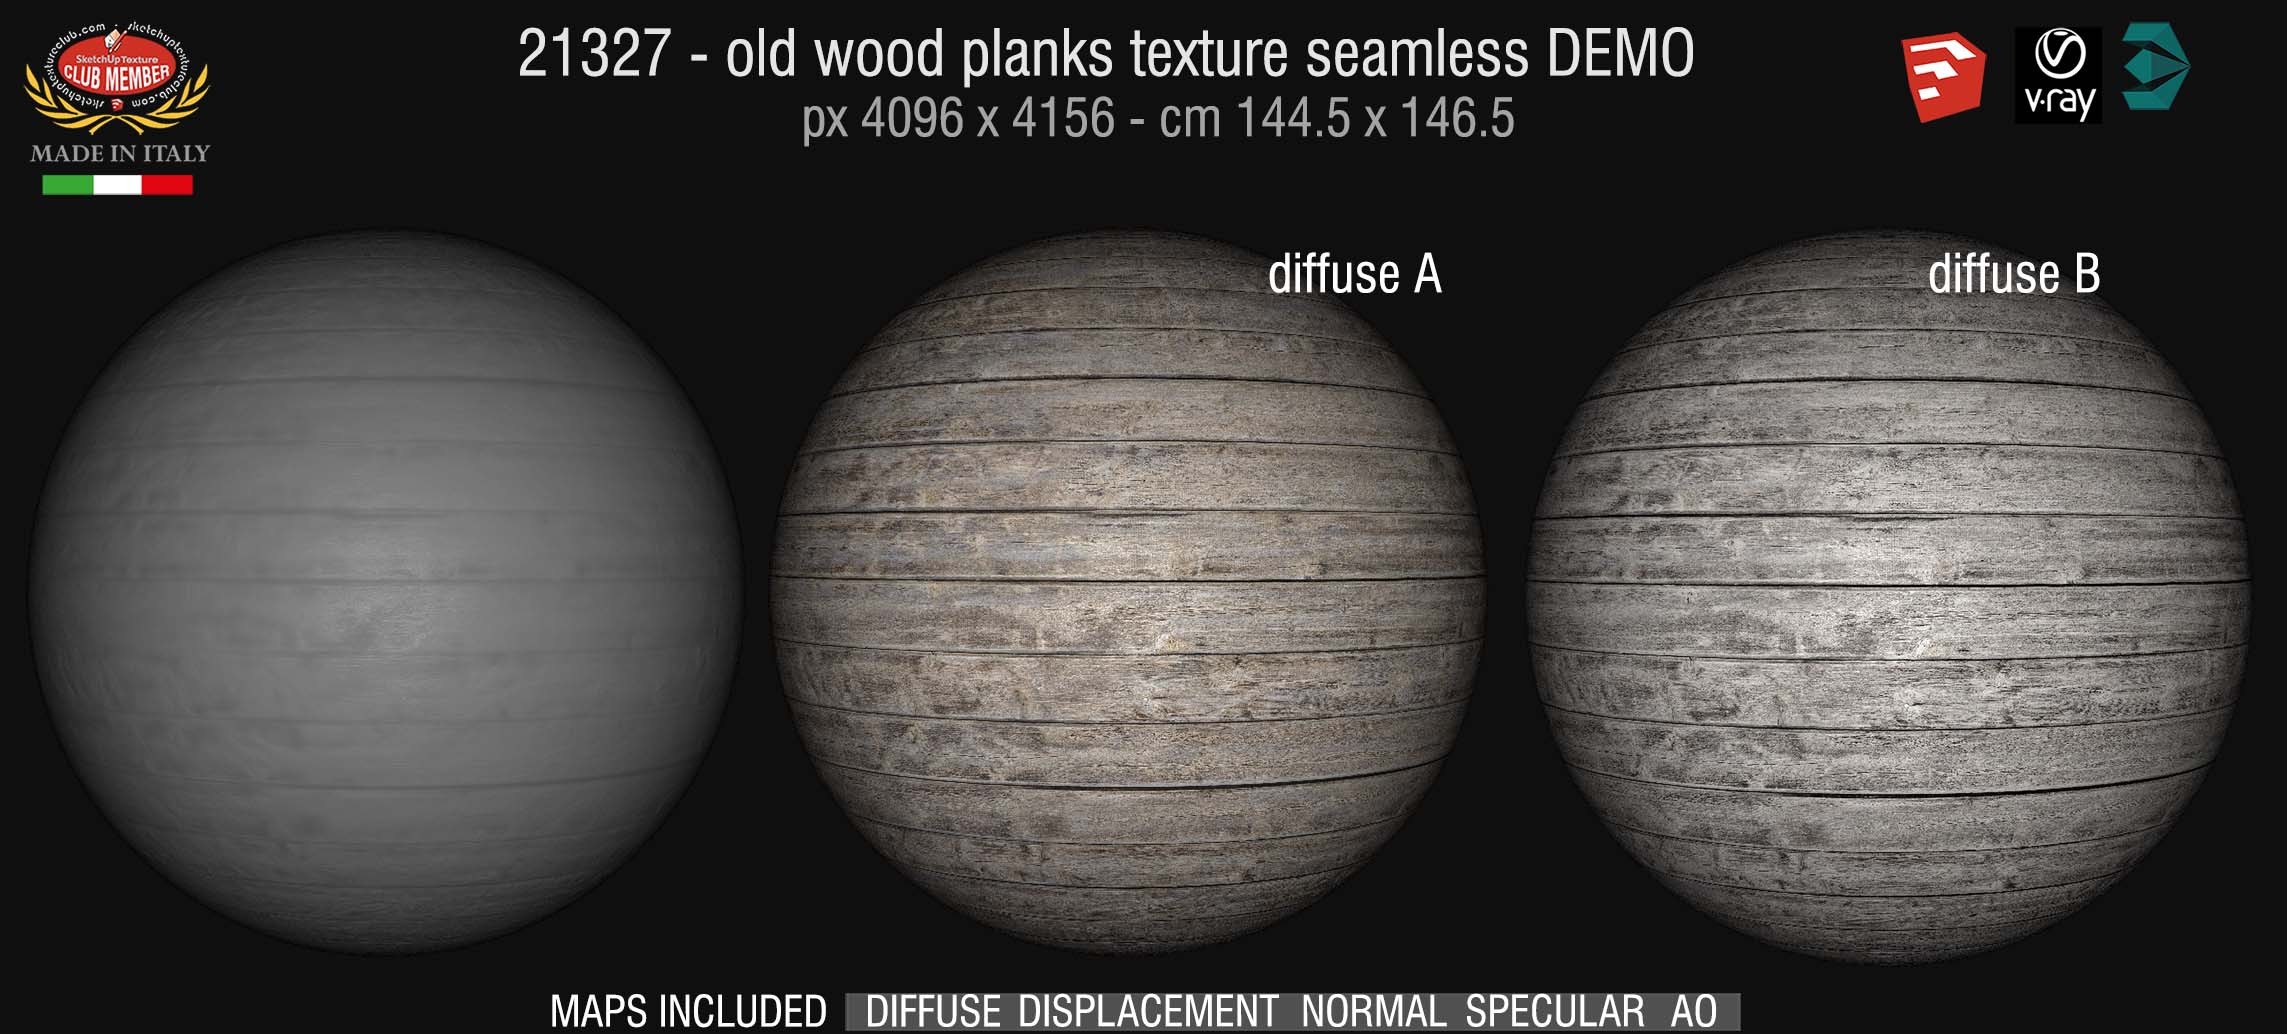 21237 HR old wood planks texture-seamless + maps DEMO